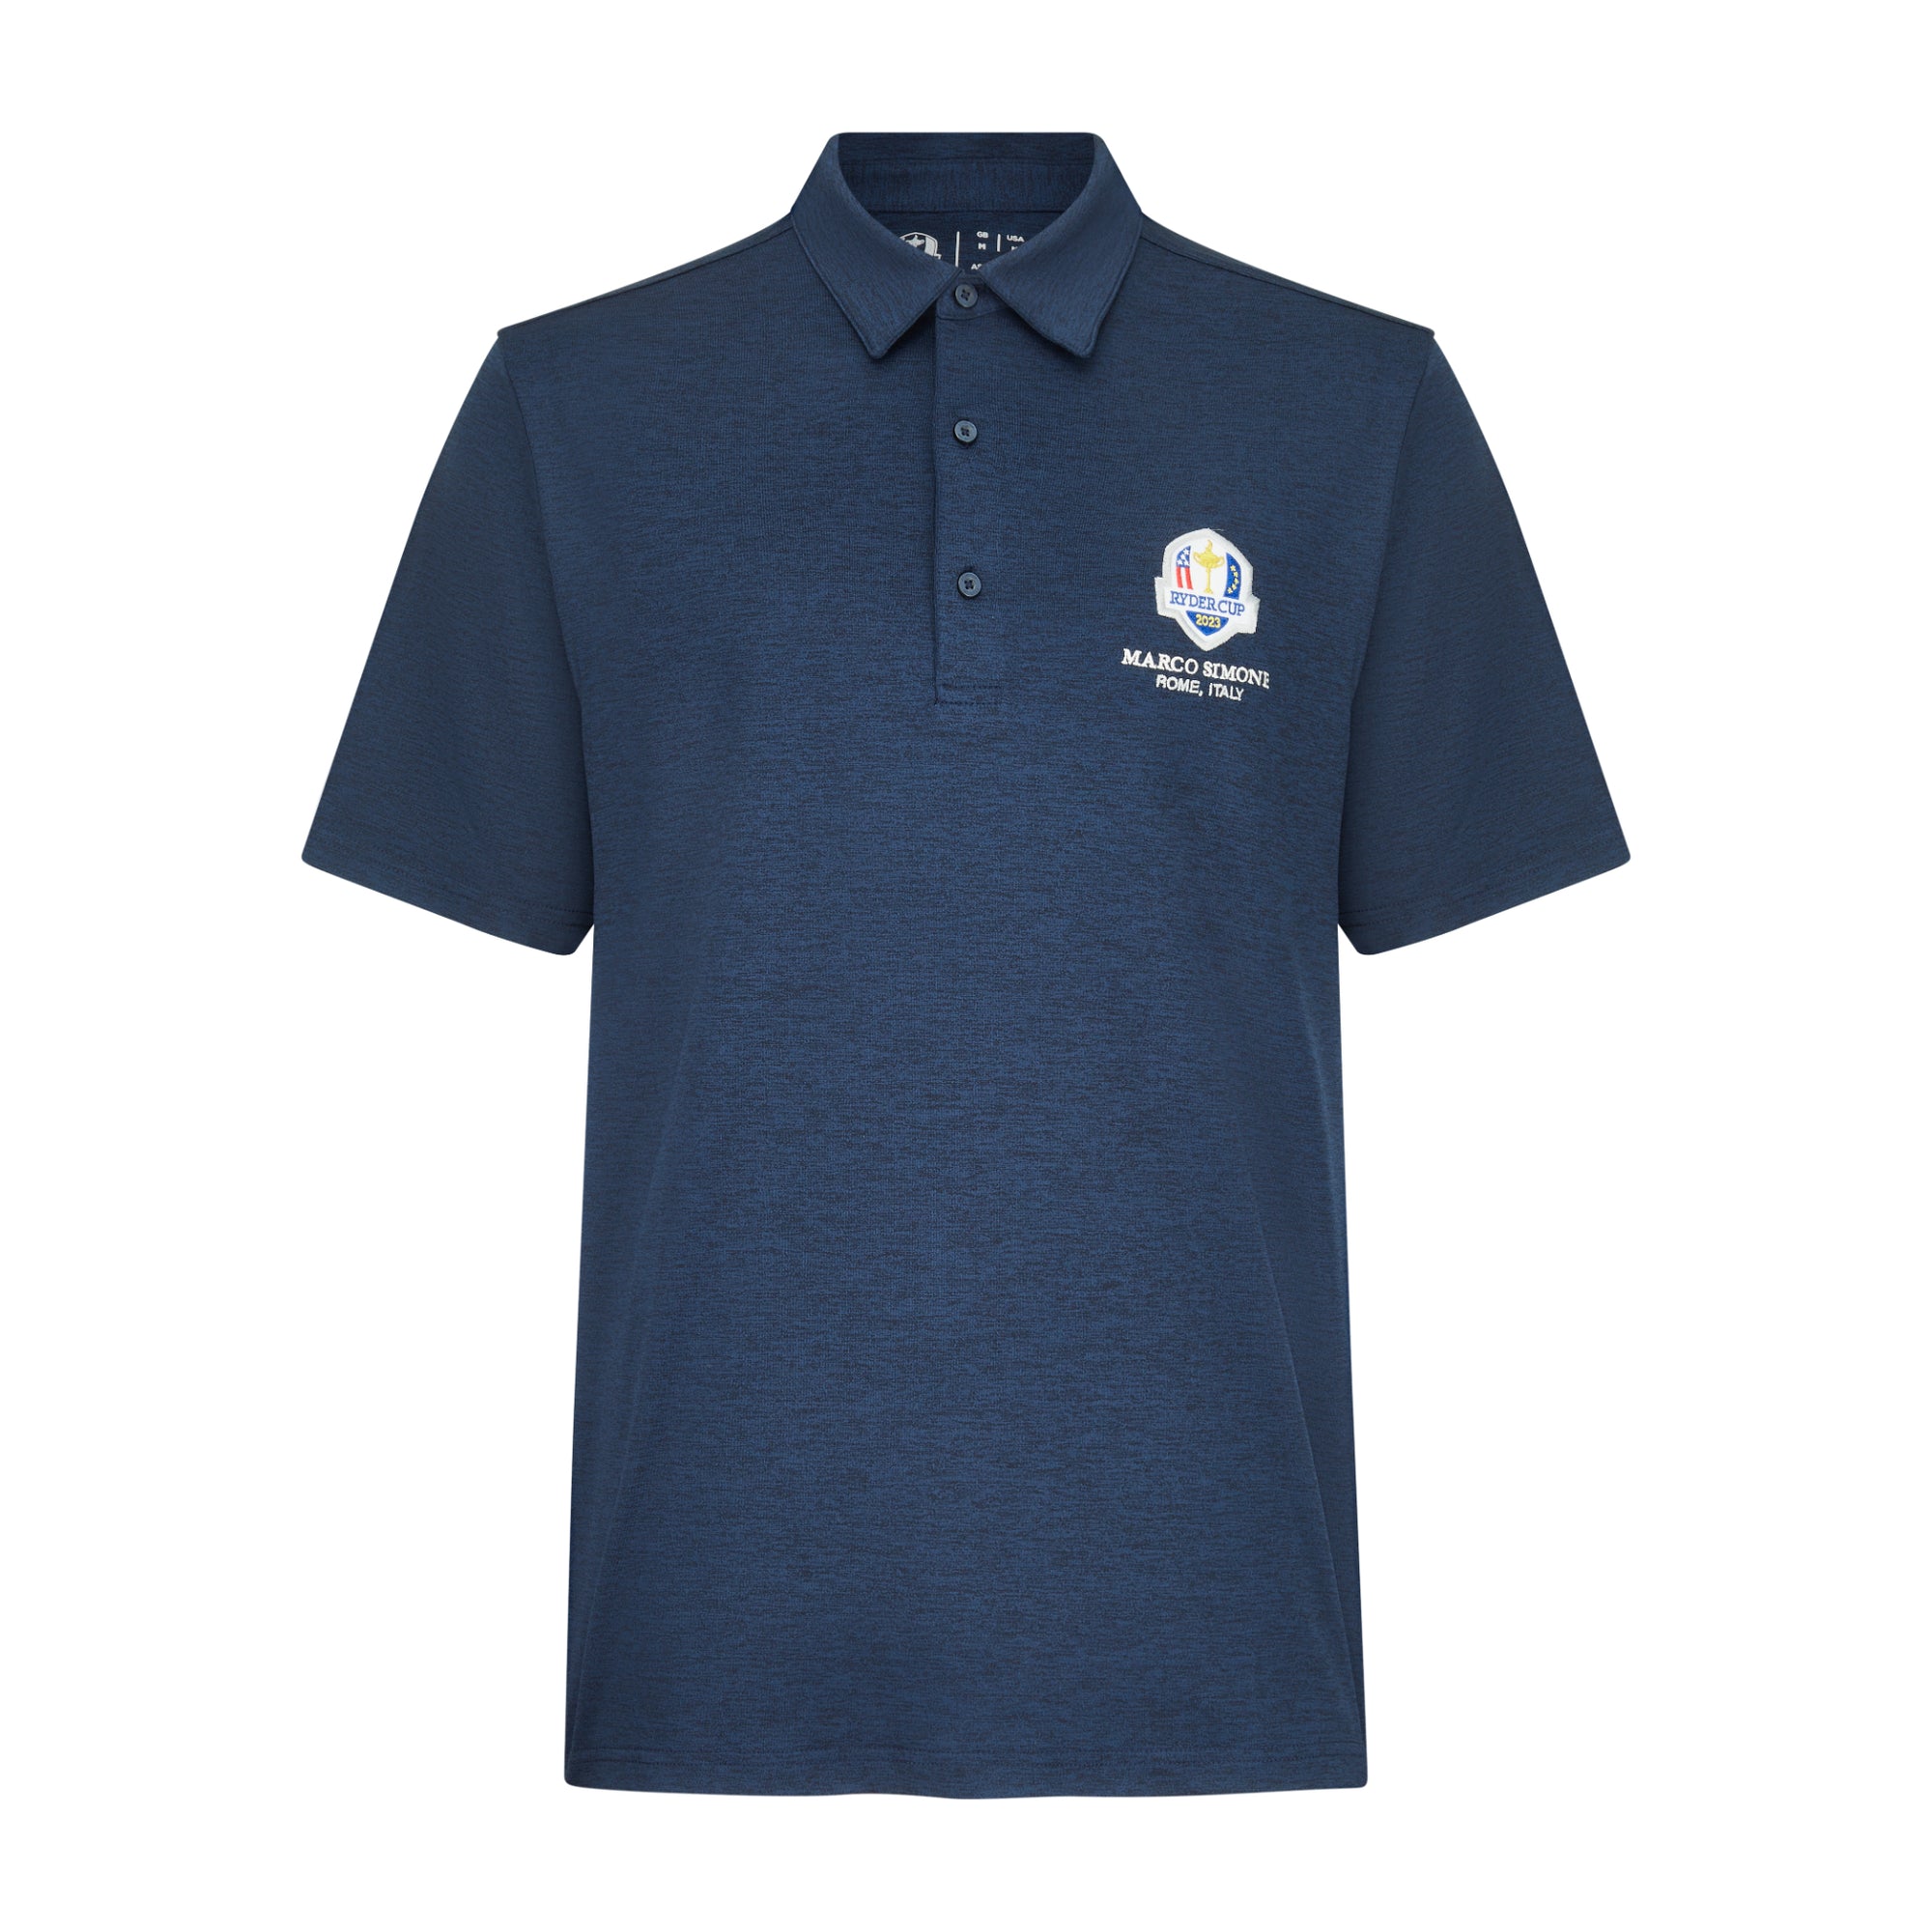 2023 Ryder Cup Men's Navy Marl Polo - Front